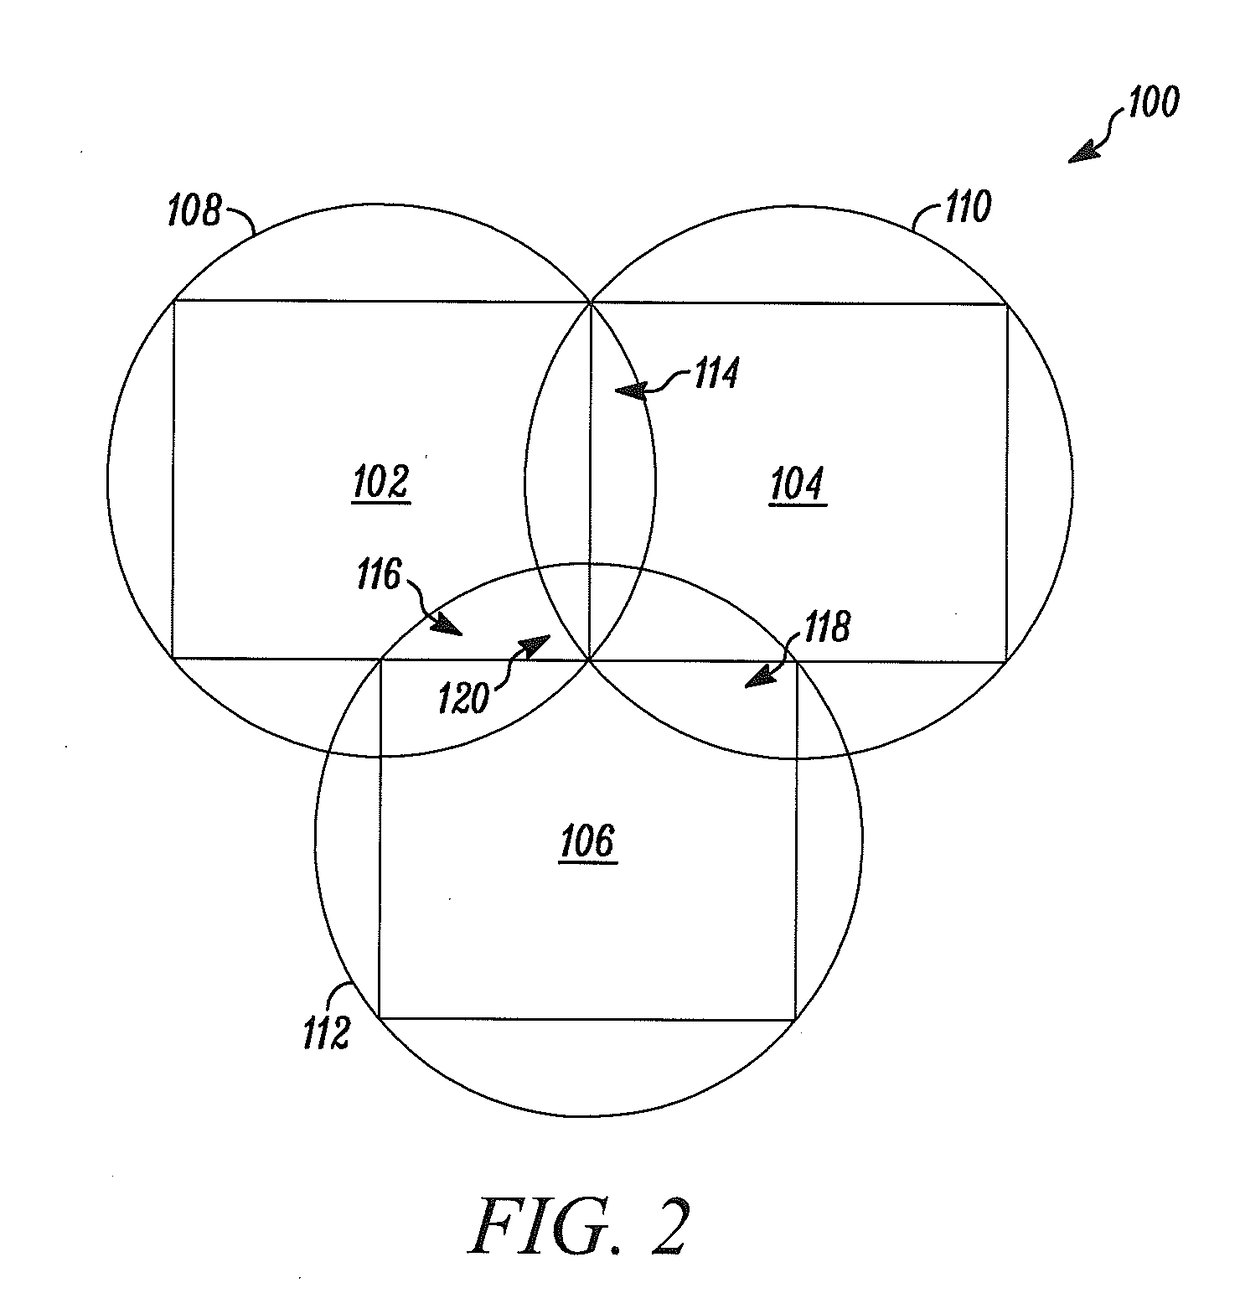 Employing offsets to create multiple orthogonal channel sequences in frequency hopping systems